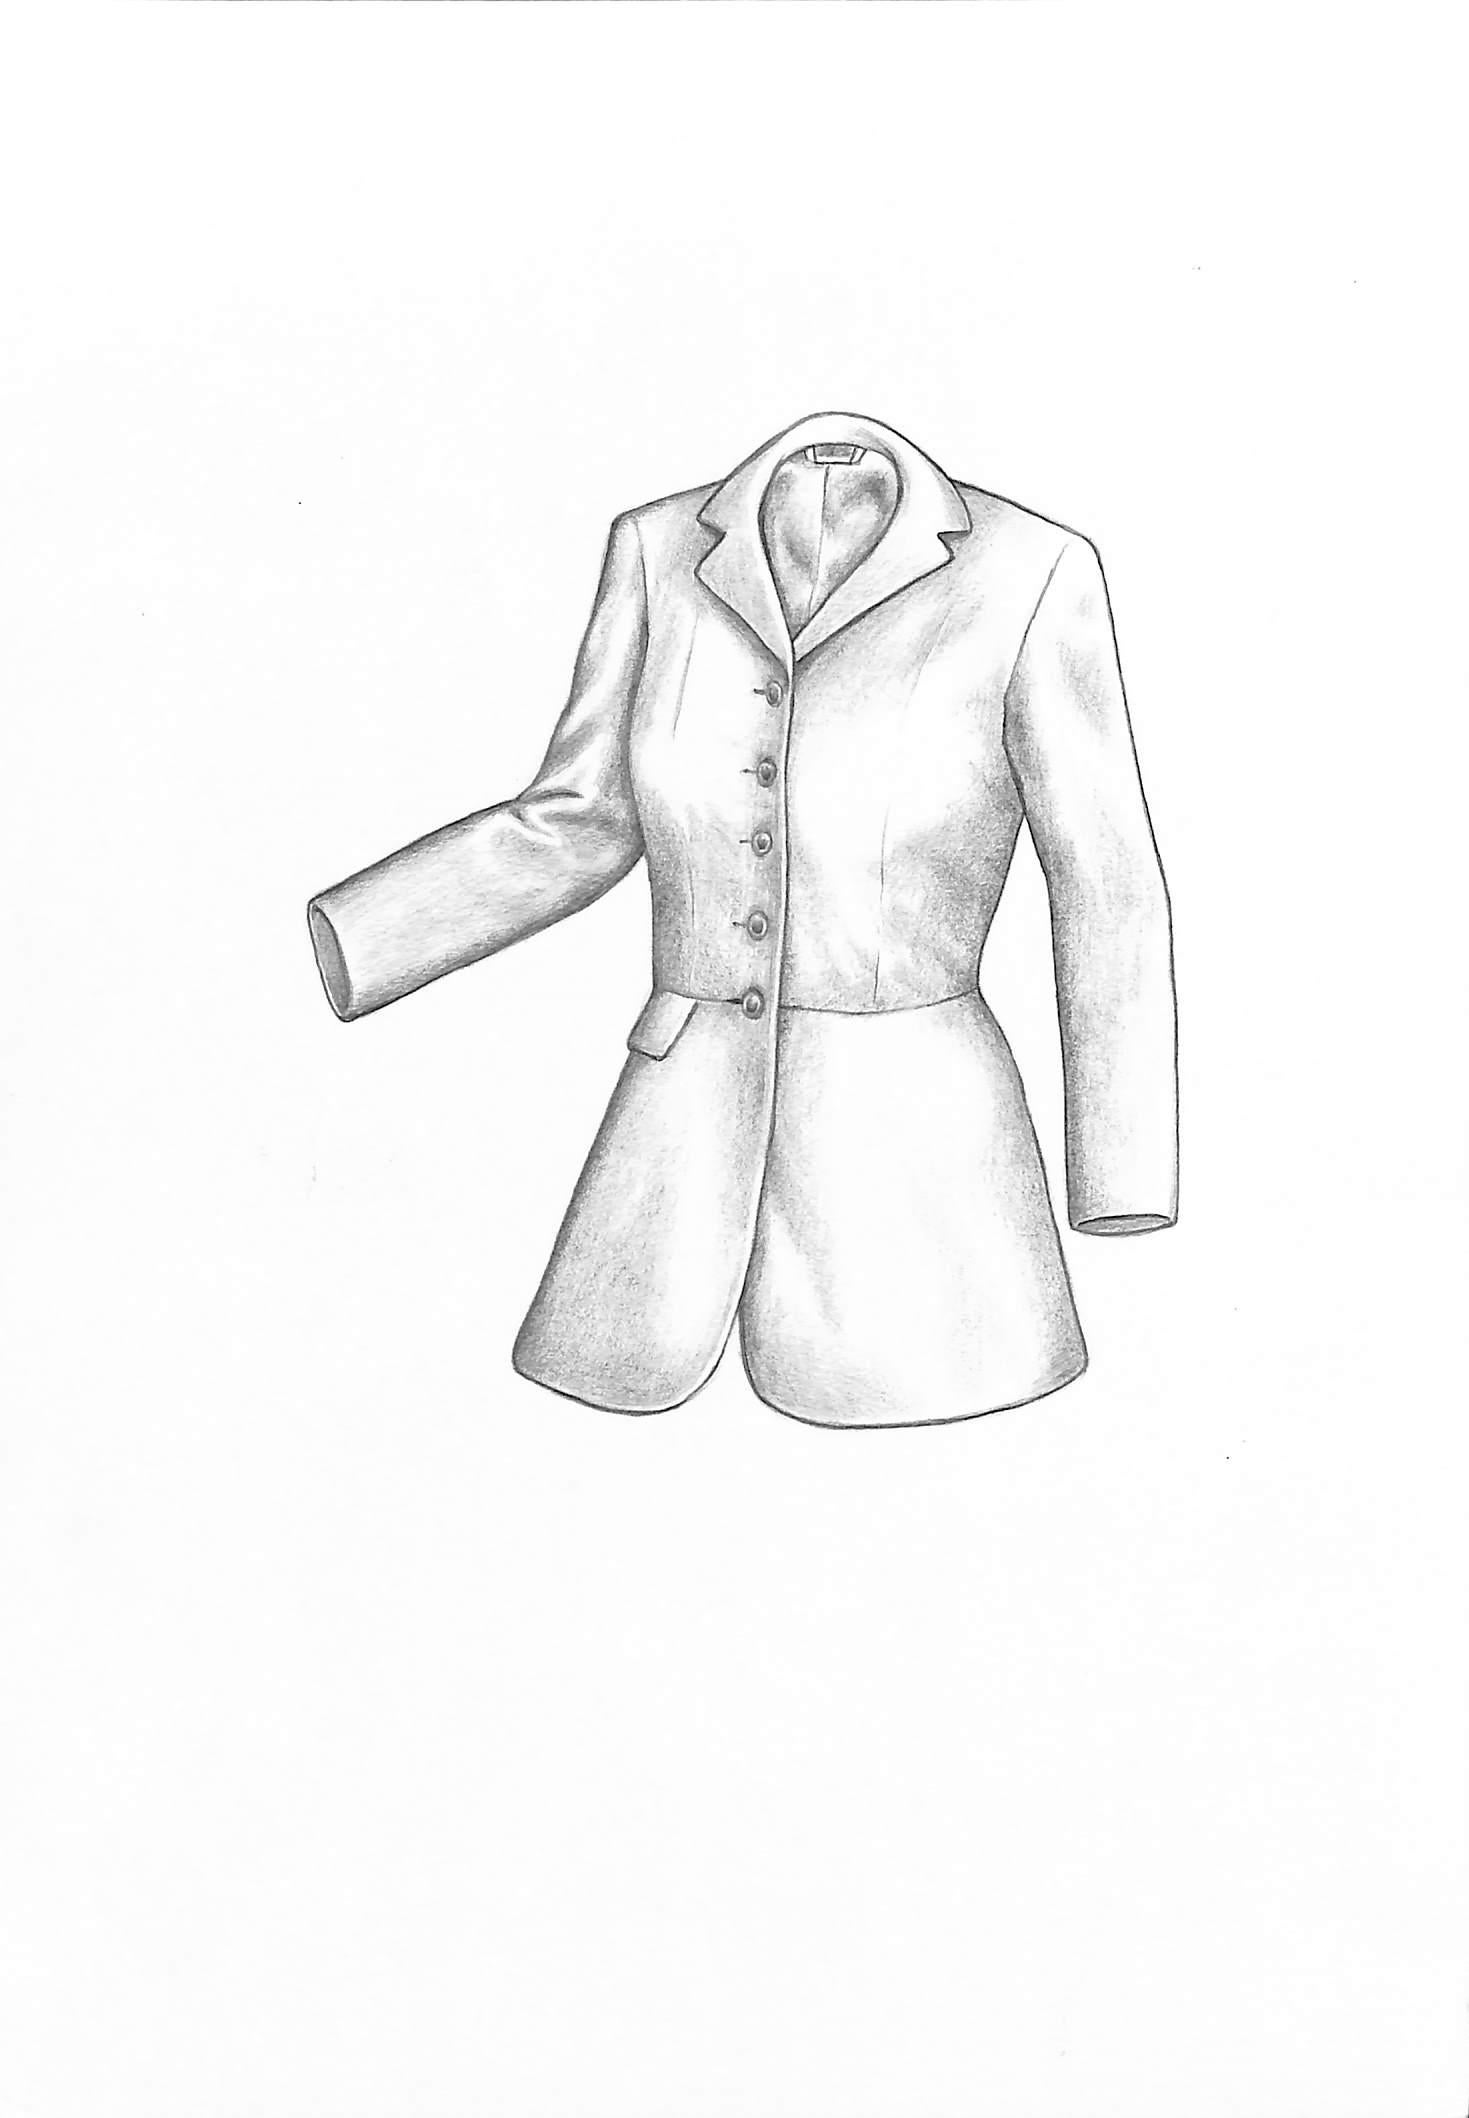 Ladies Frock Coat Graphite Drawing - Art by Unknown